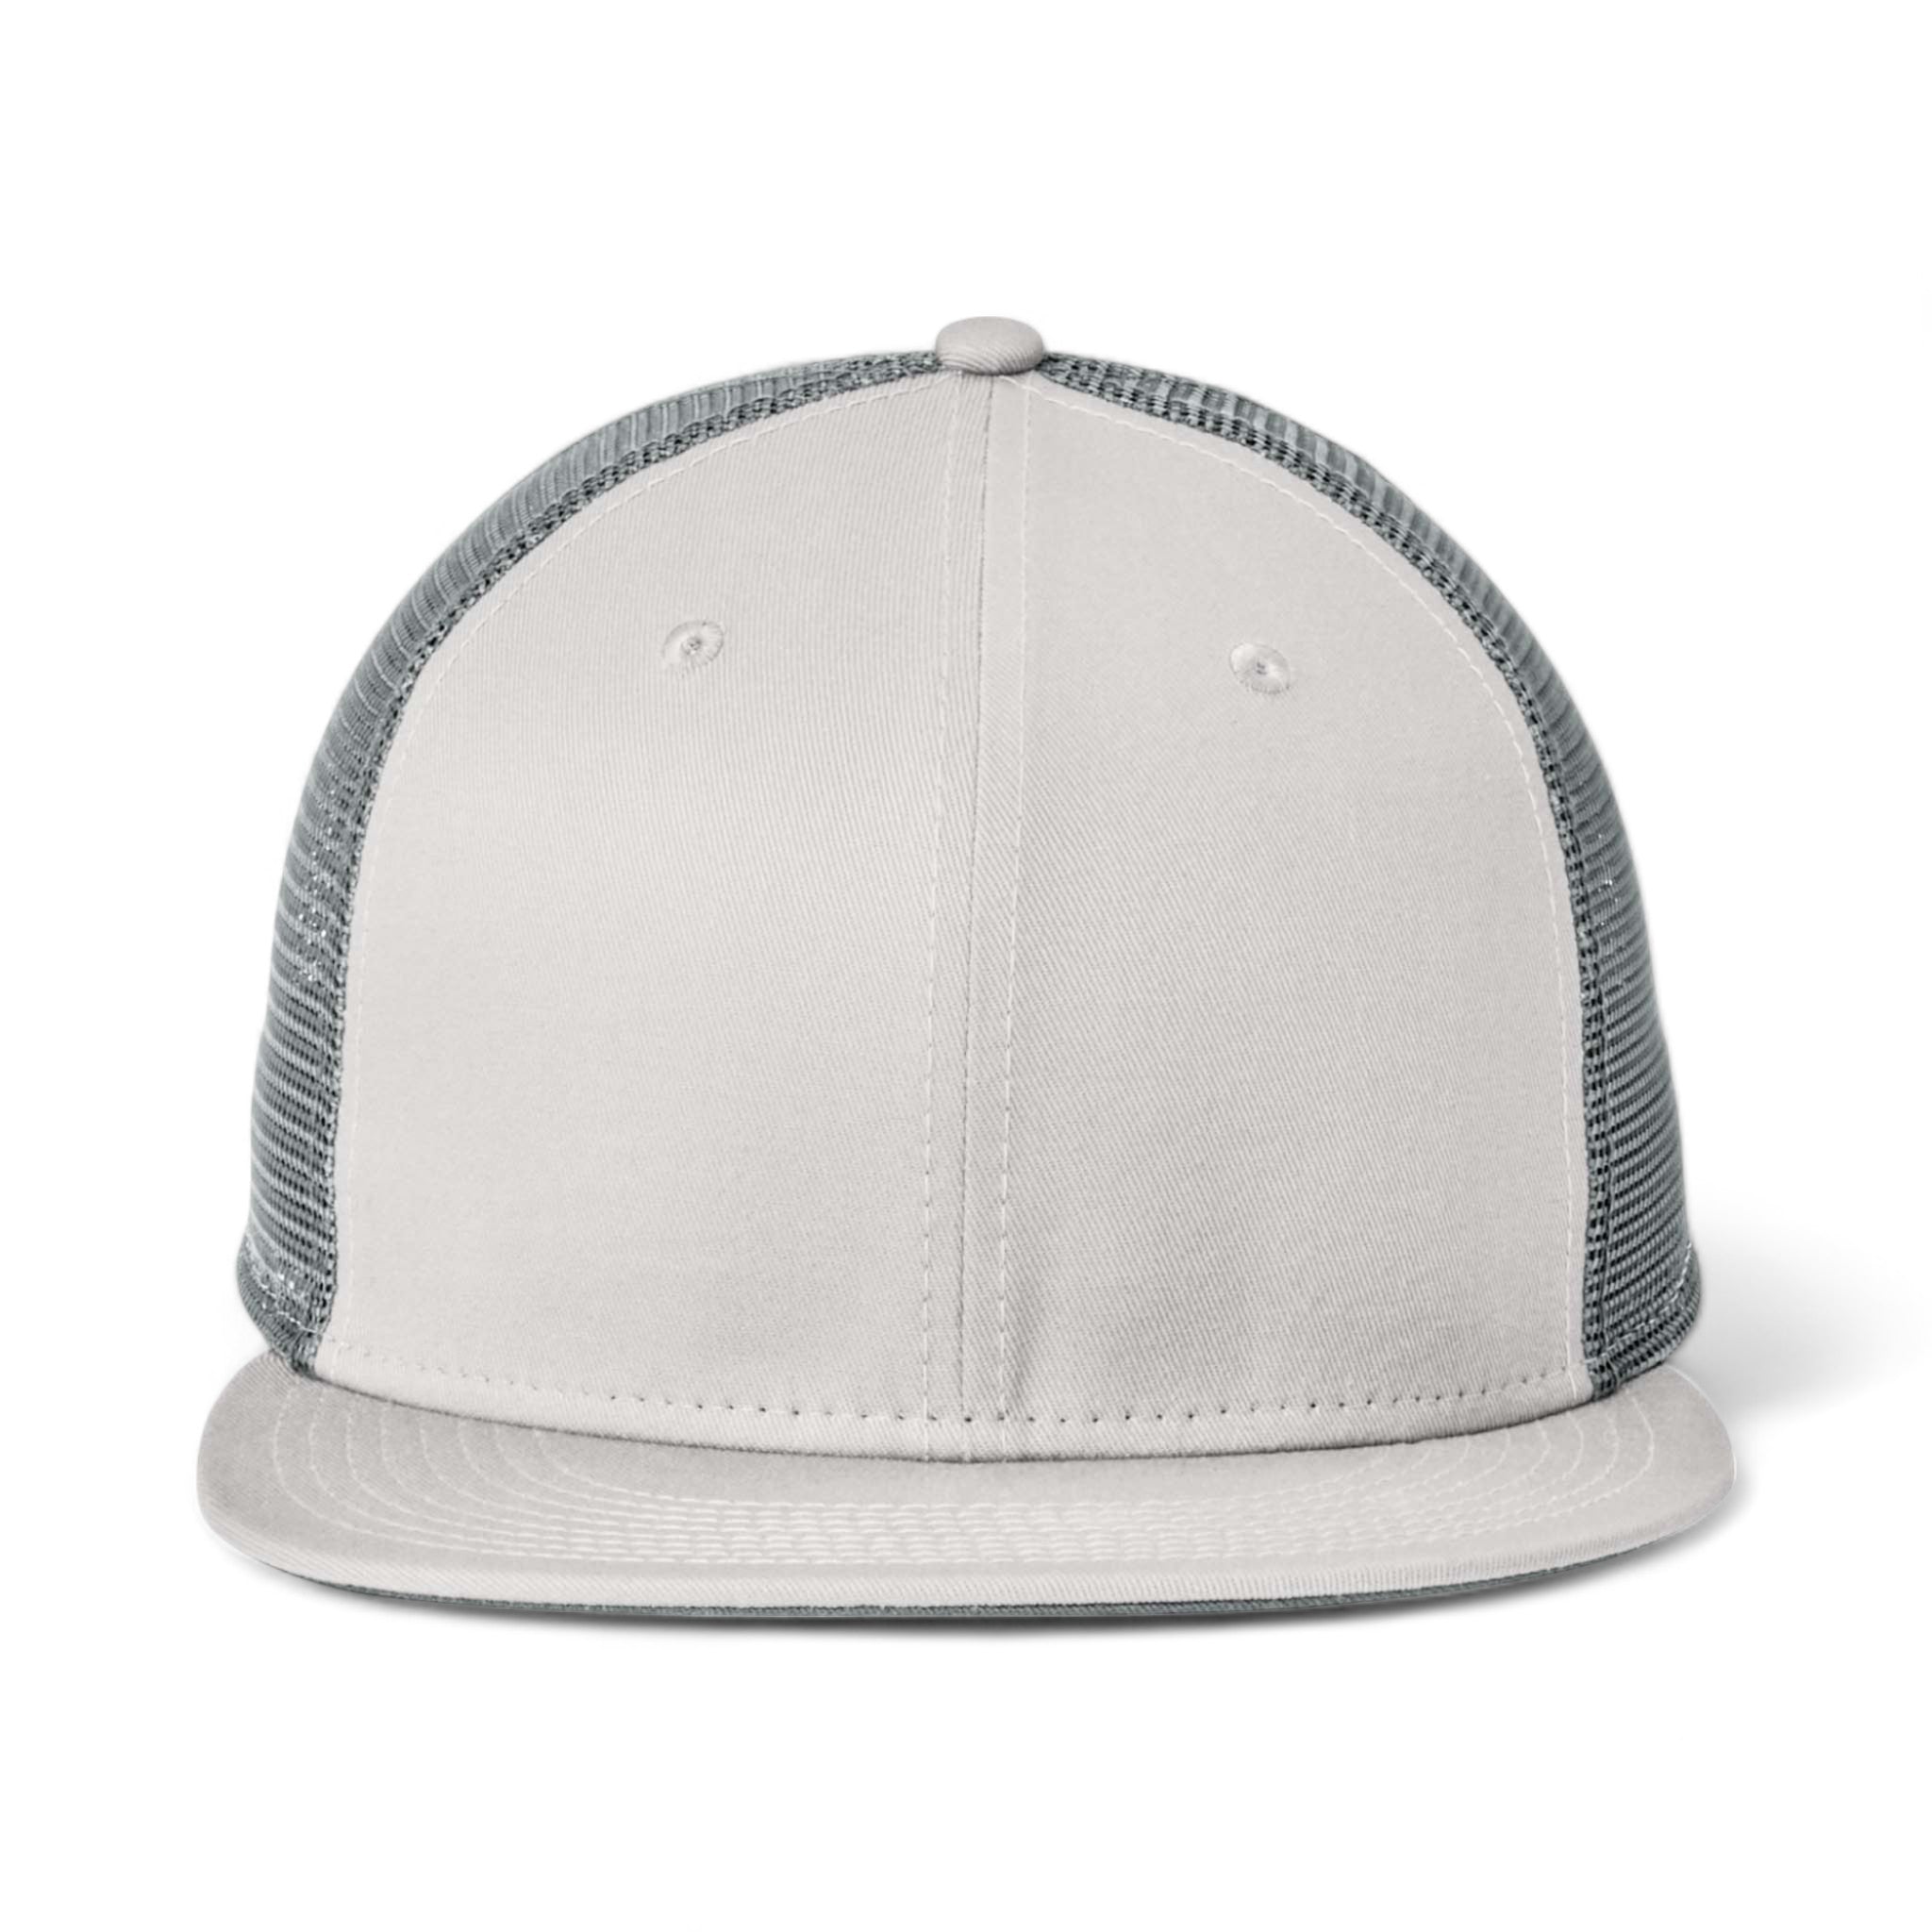 Front view of New Era NE4030 custom hat in grey and graphite